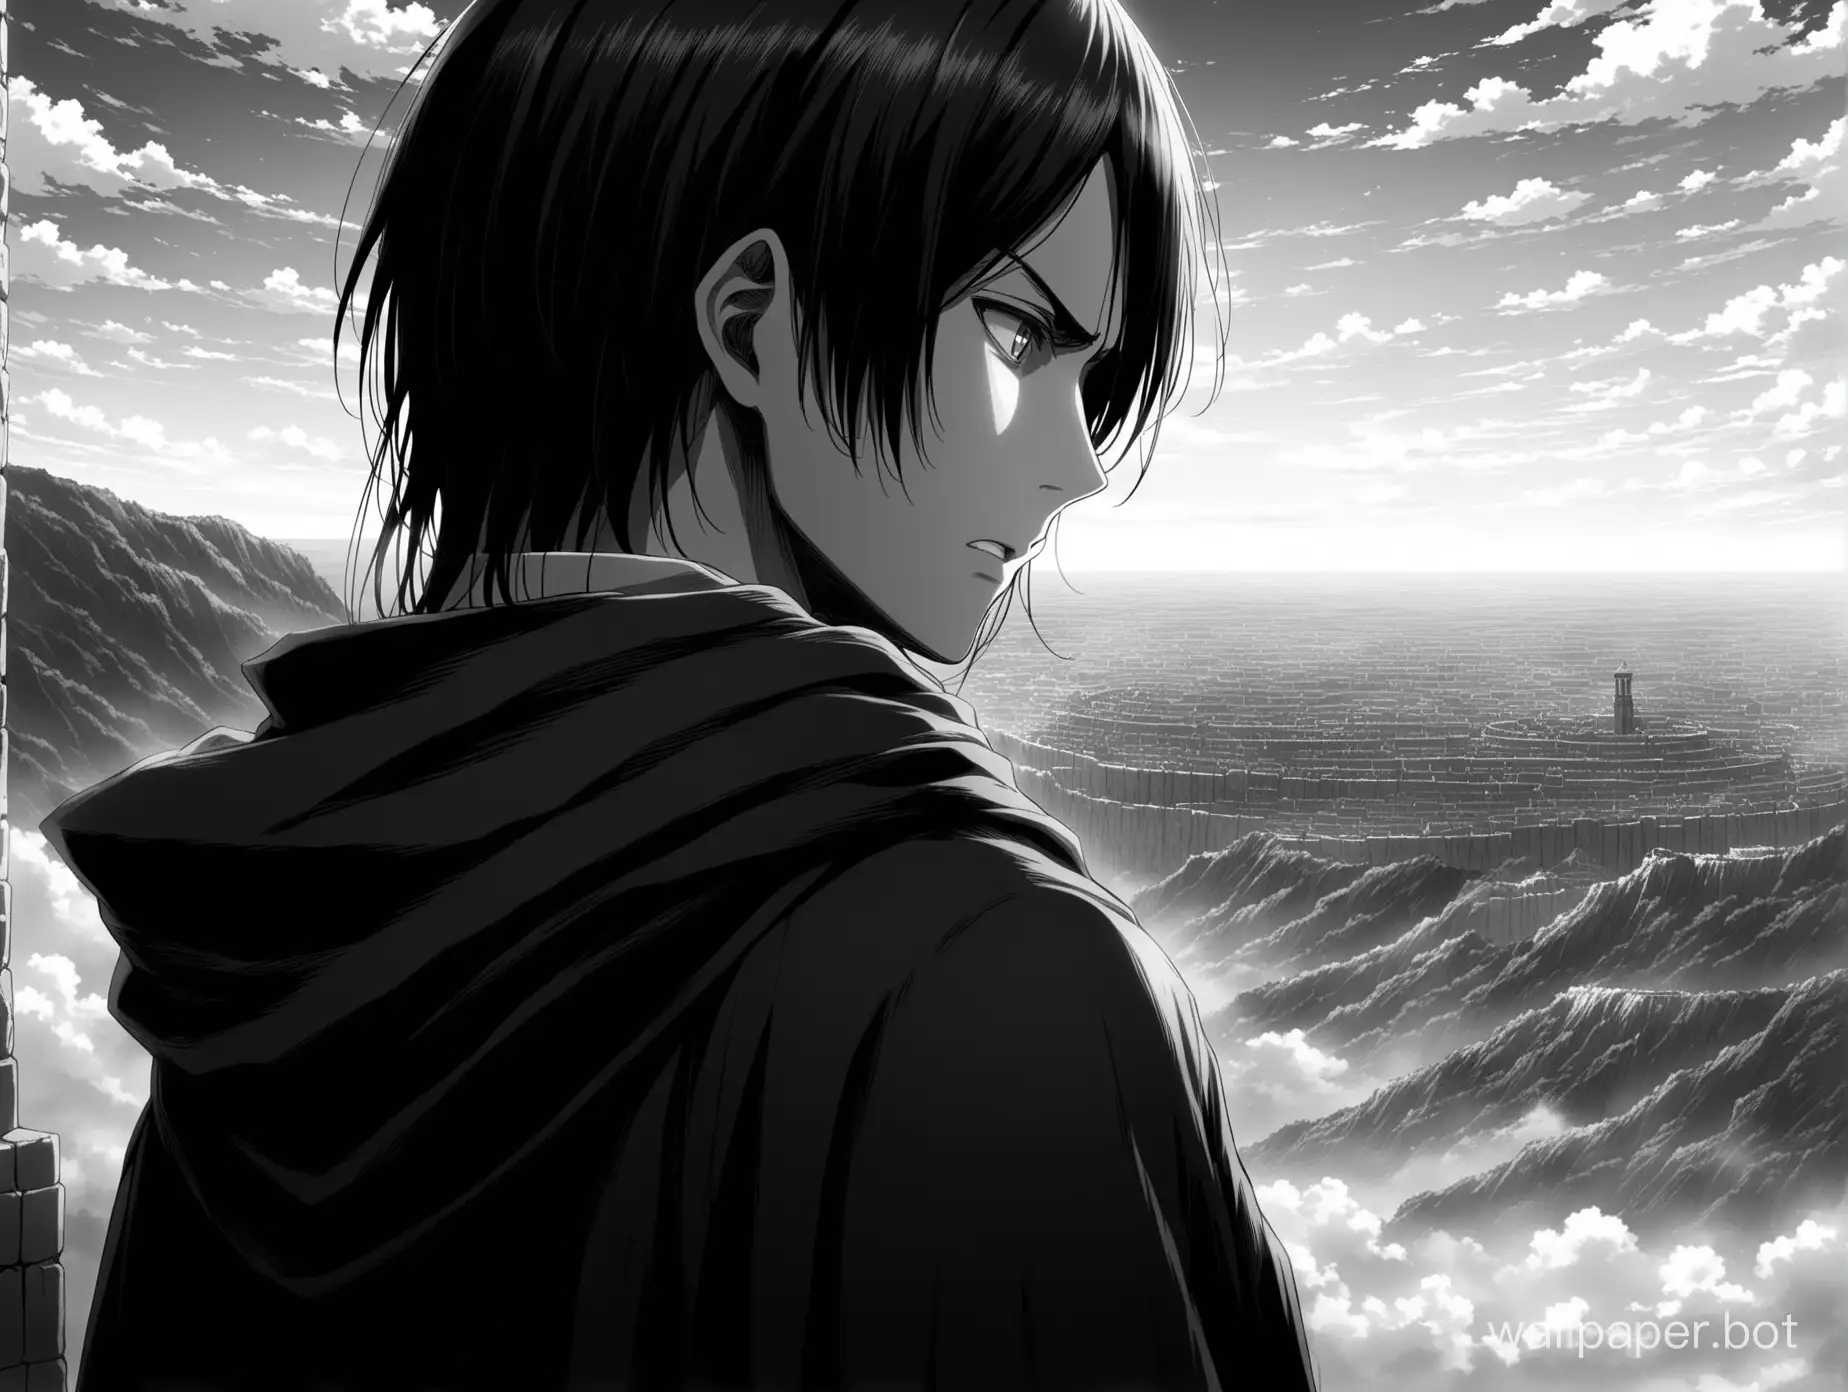 Attack on titan, black and white, Eren with long hair and black robe looking out in the distance while deep in thought